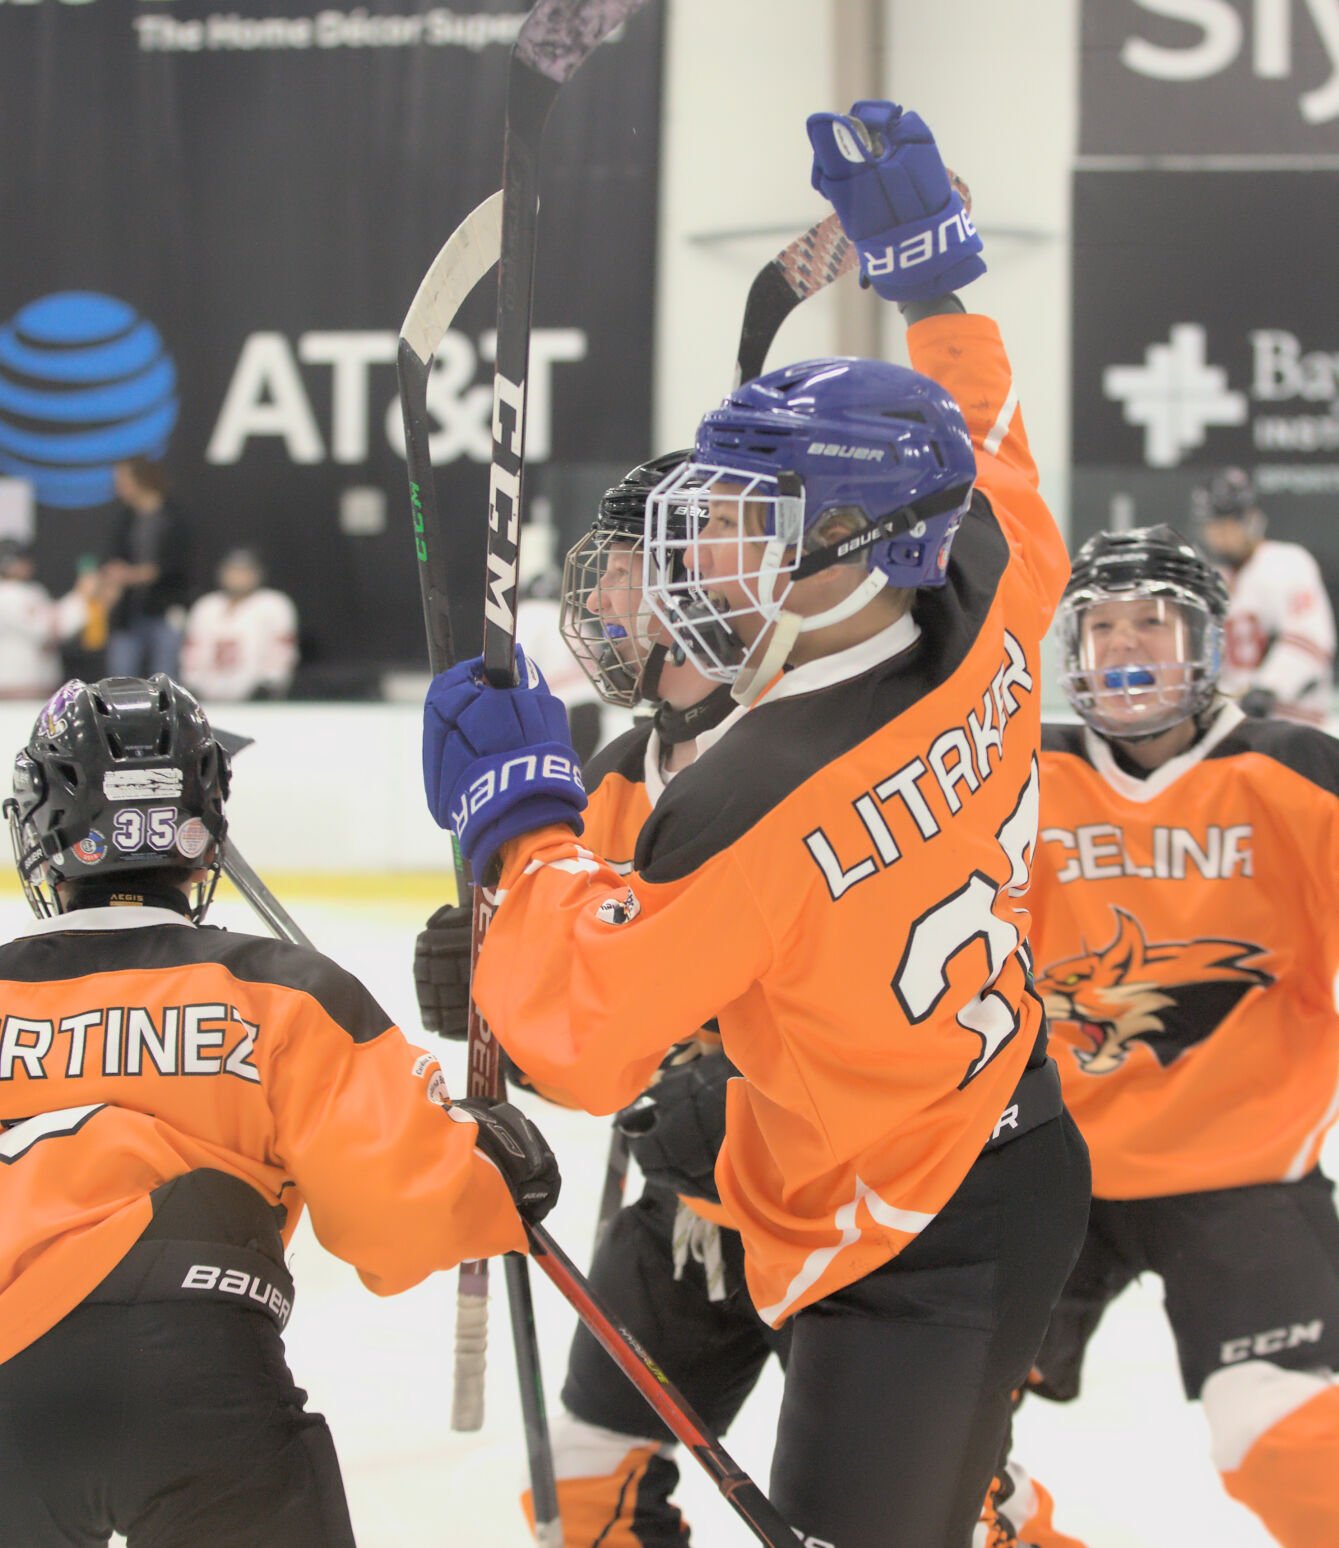 Hockey in Celina, Texas? You bet, as Celina Hockey Association looks ahead to growth after first season Celina Record starlocalmedia picture